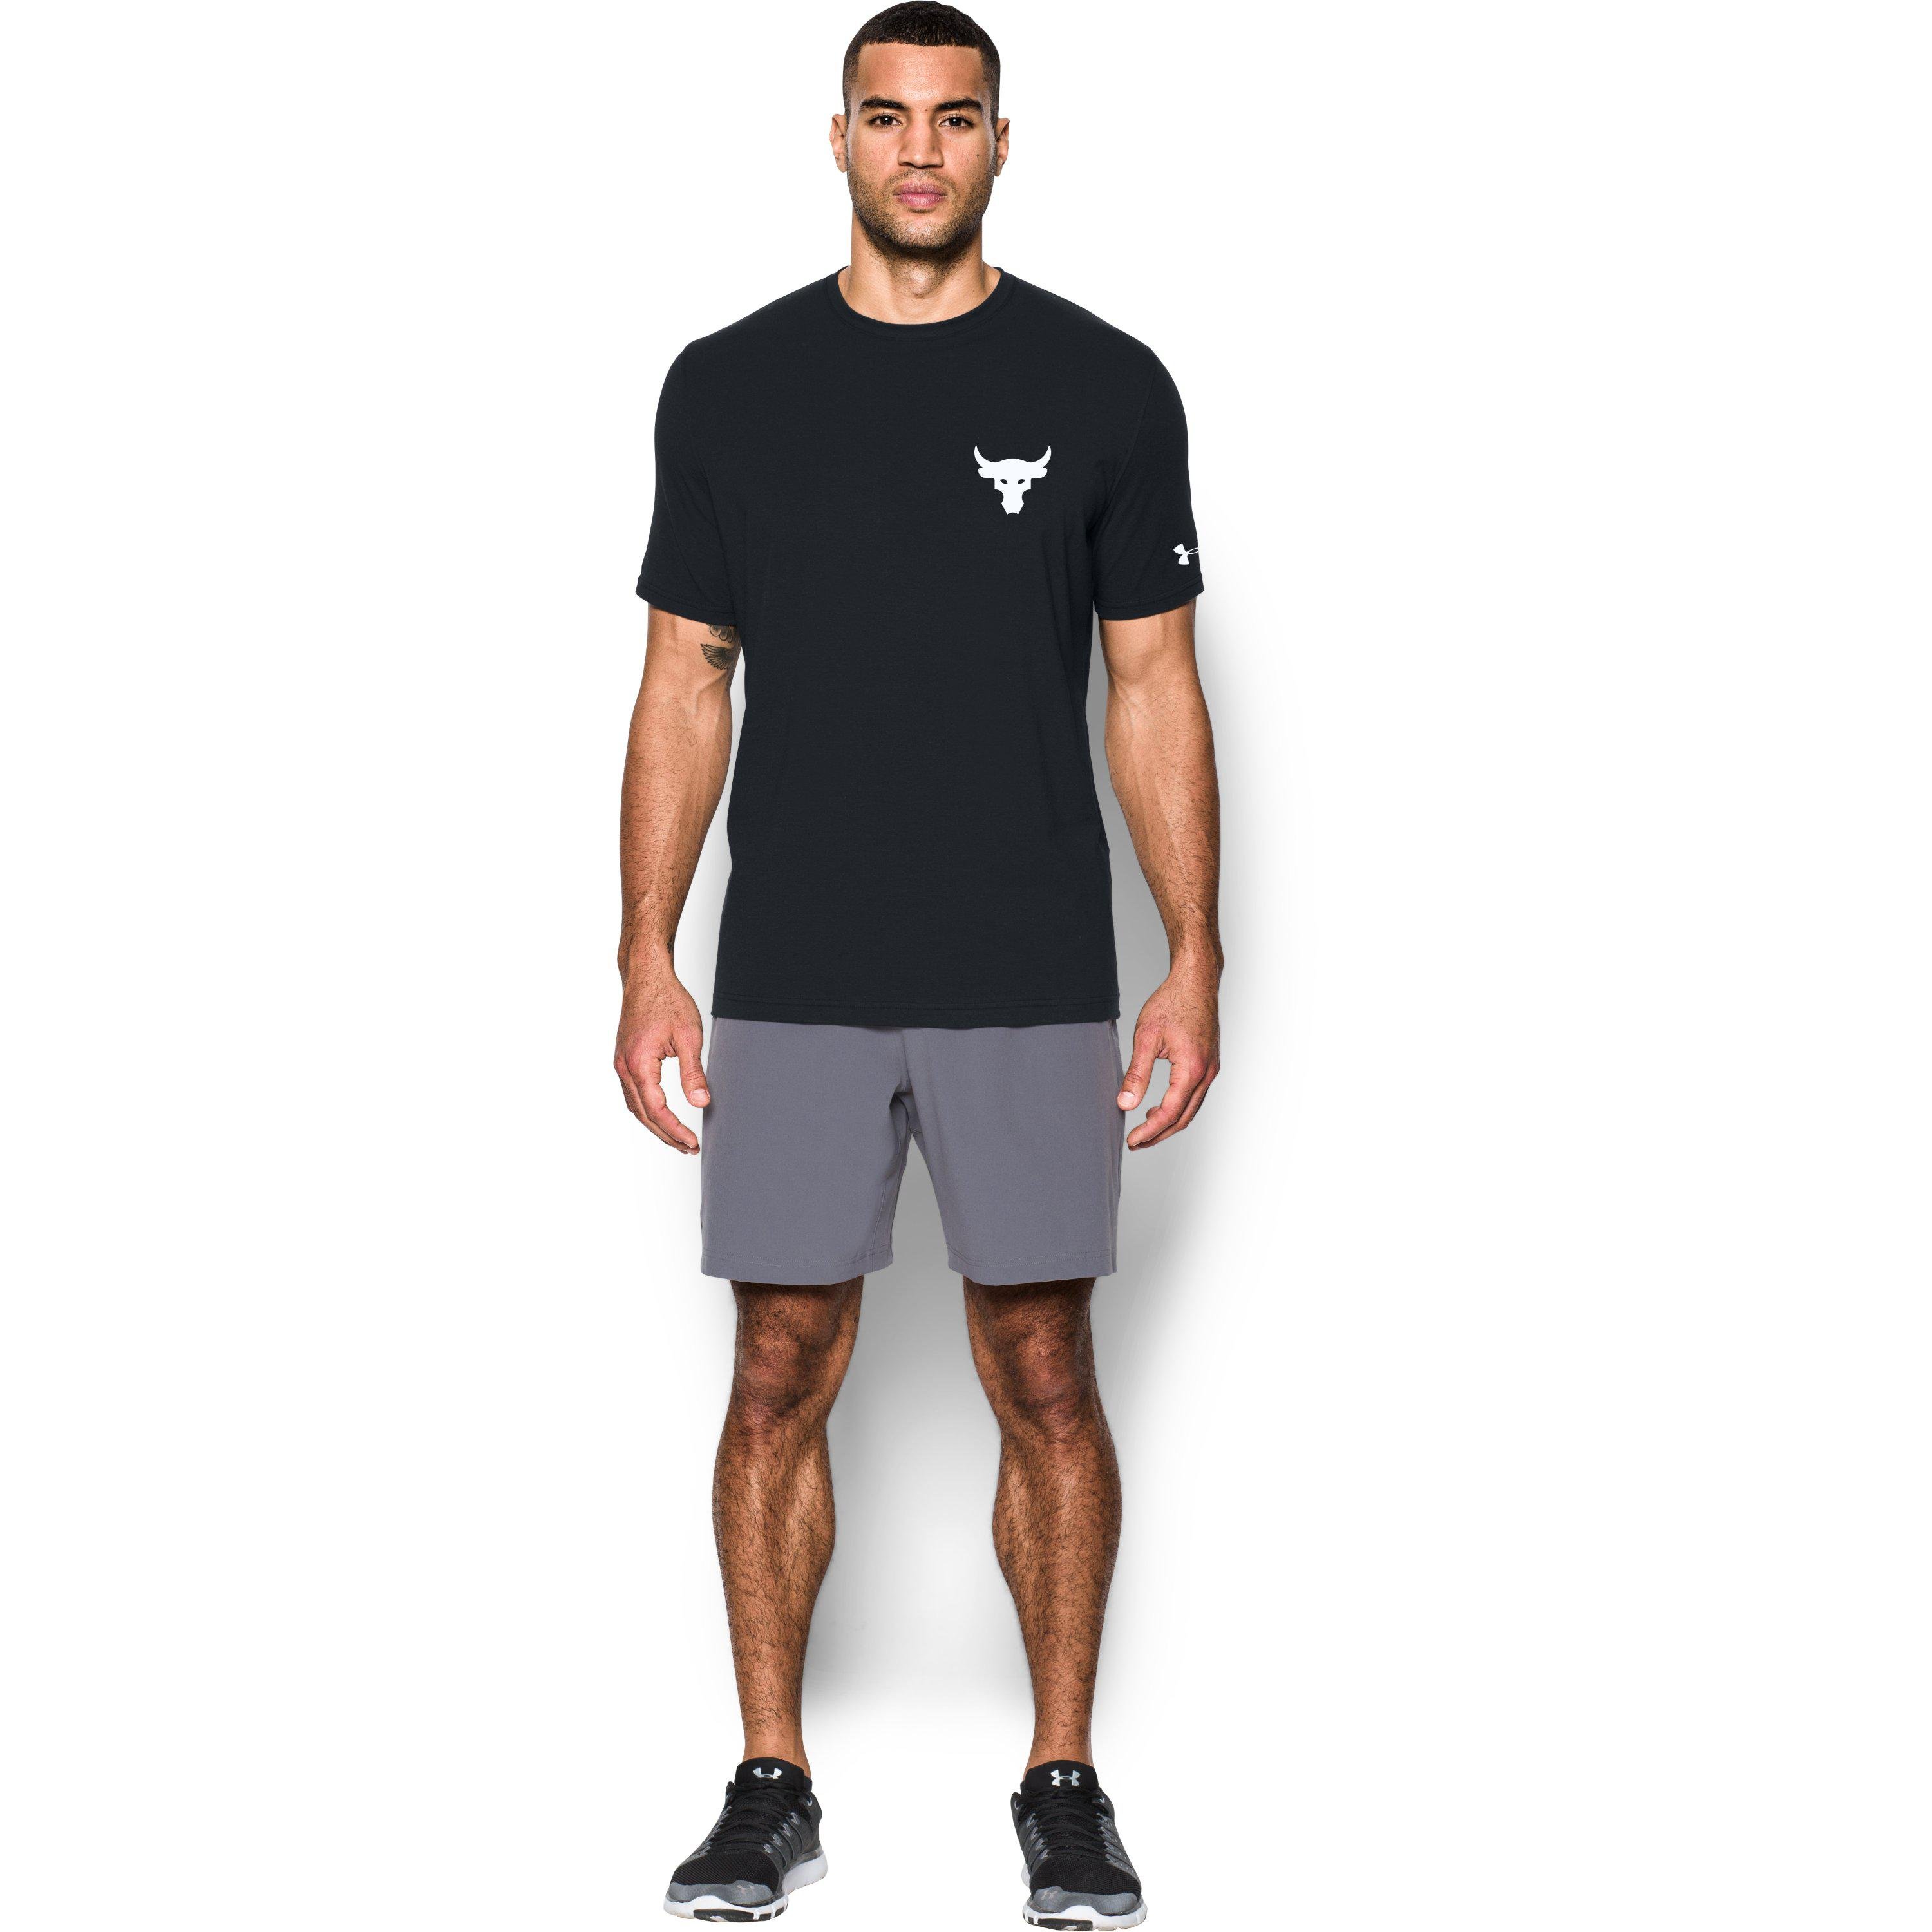 Under Armour Project Rock Rents Due Short Sleeve T-Shirt